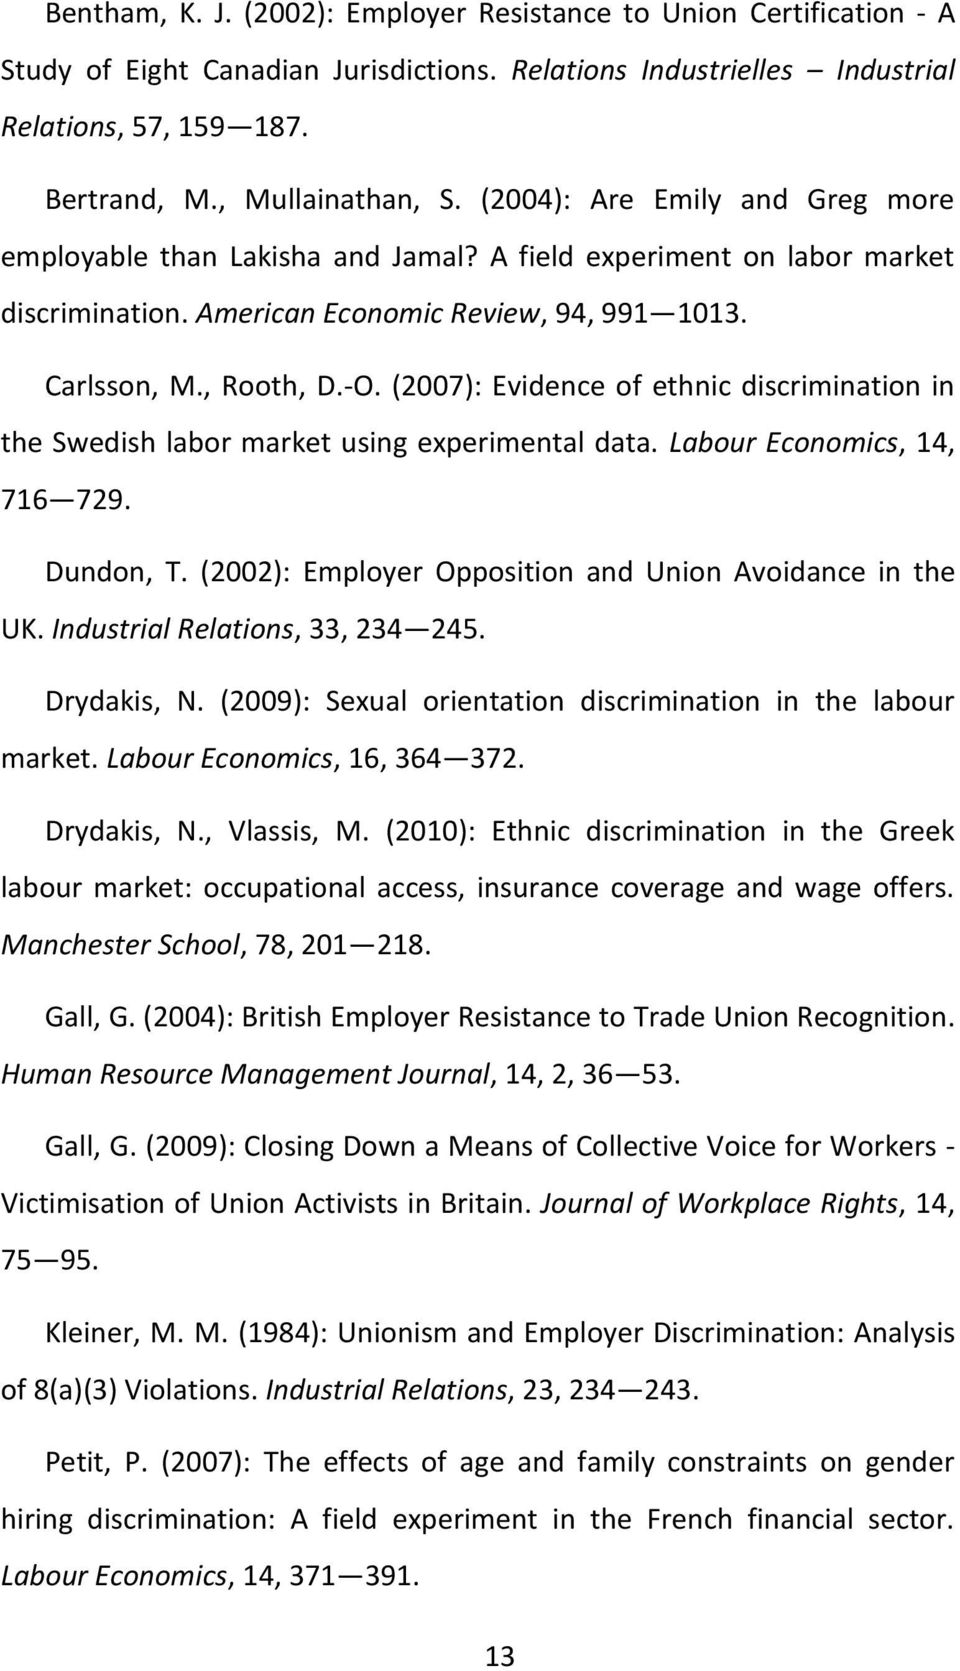 (2007): Evidence of ethnic discrimination in the Swedish labor market using experimental data. Labour Economics, 14, 716 729. Dundon, T. (2002): Employer Opposition and Union Avoidance in the UK.